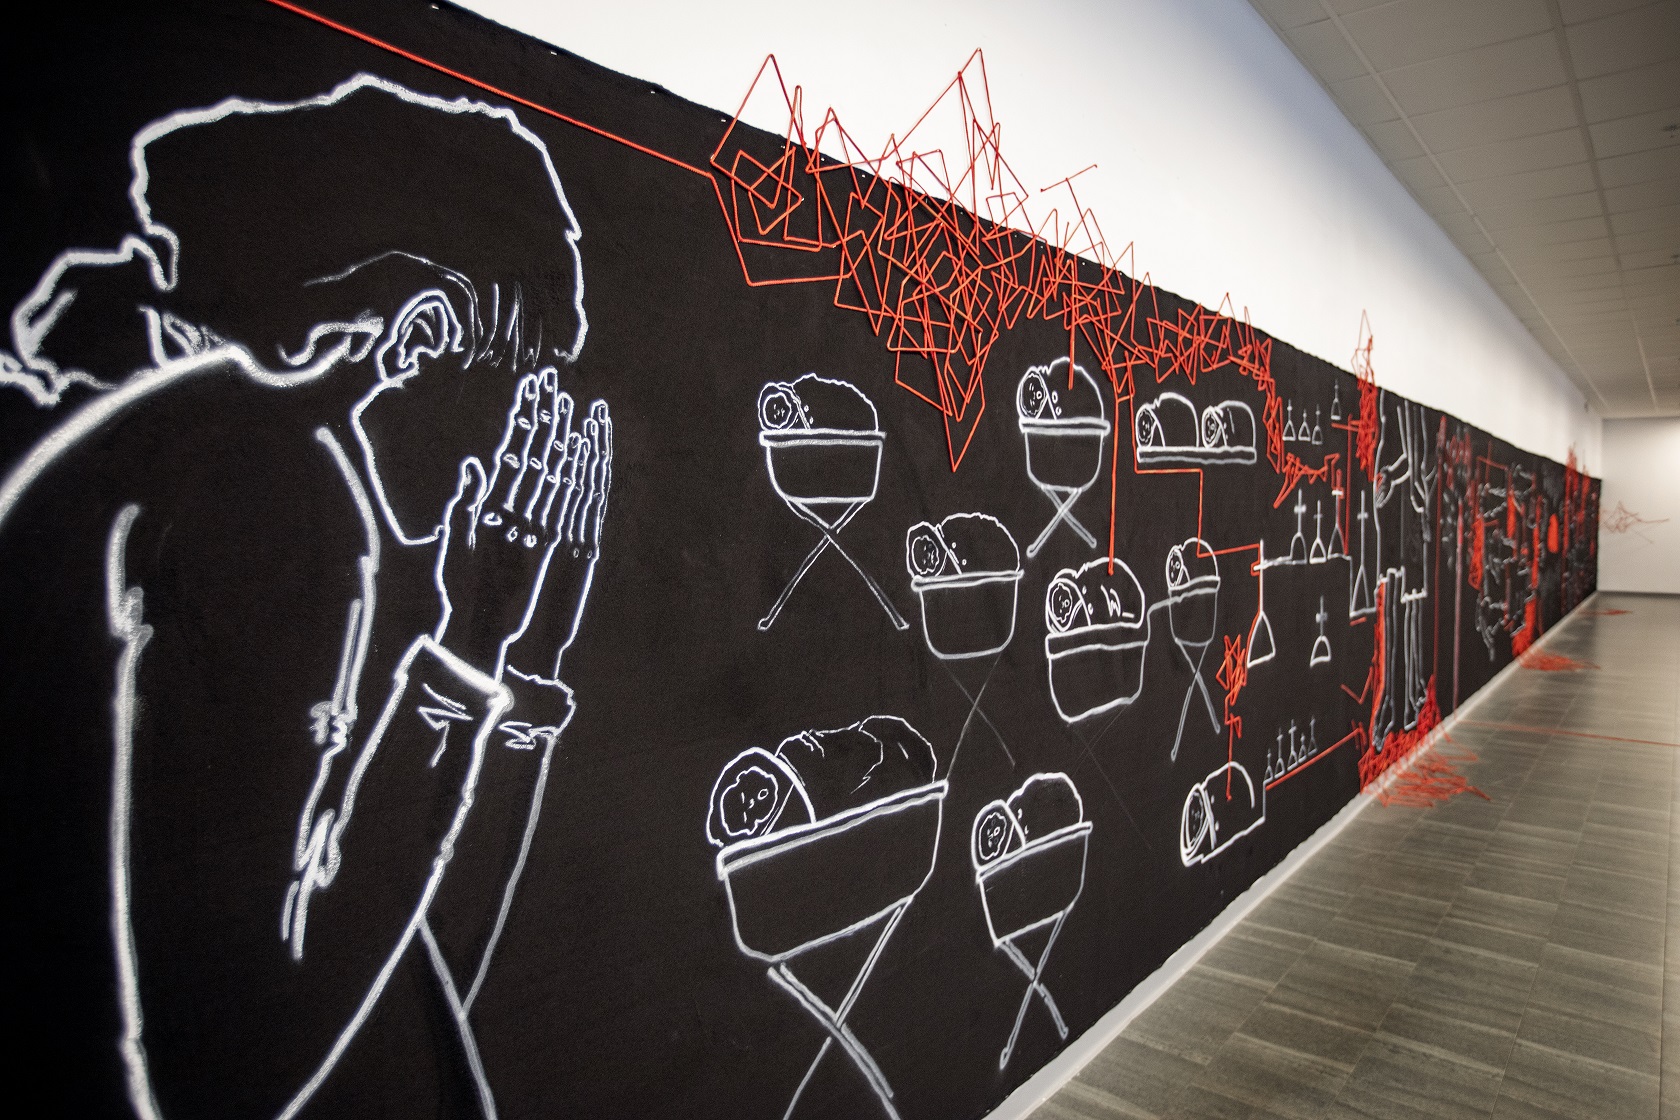 Black canvas stretching over 20 meters with white paintings and red lines. A grieving woman is seen closest in picture.